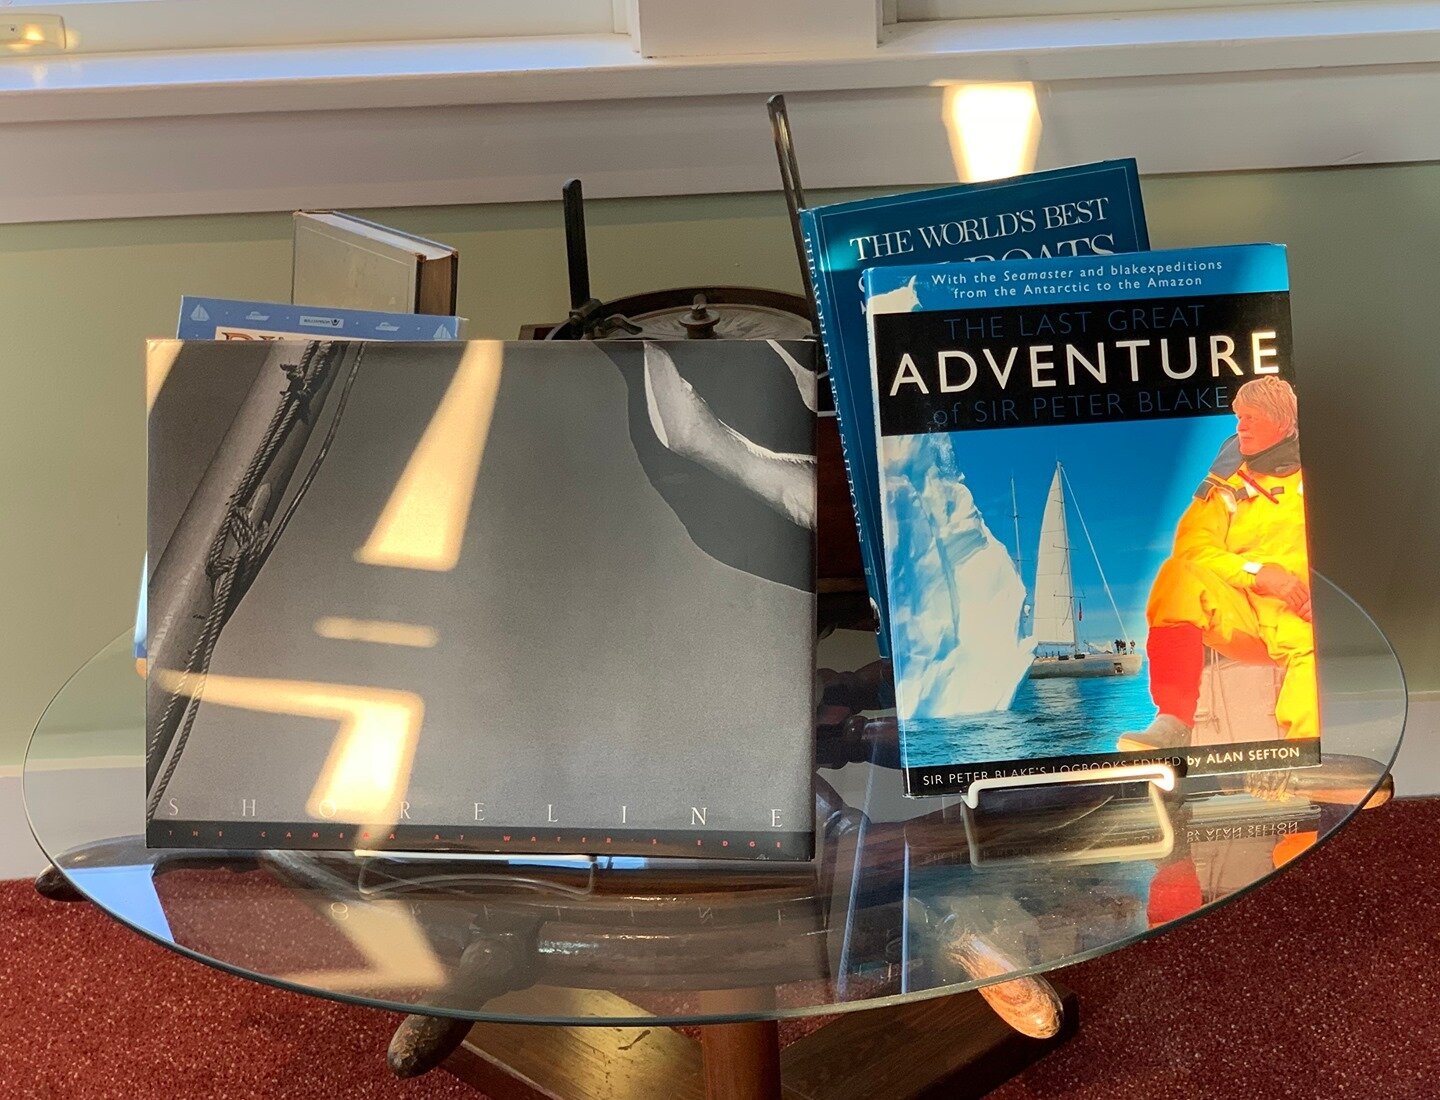 Great books bring the adventure home. We're have lots of titles where you can travel through the pages.⁠
⁠
We're open today from 10 a.m. to 4 p.m. Come find us on the river! ⁠
⁠
#damariscottaME #newcastleME #independentbookstore #skidomphaLibrary #sk